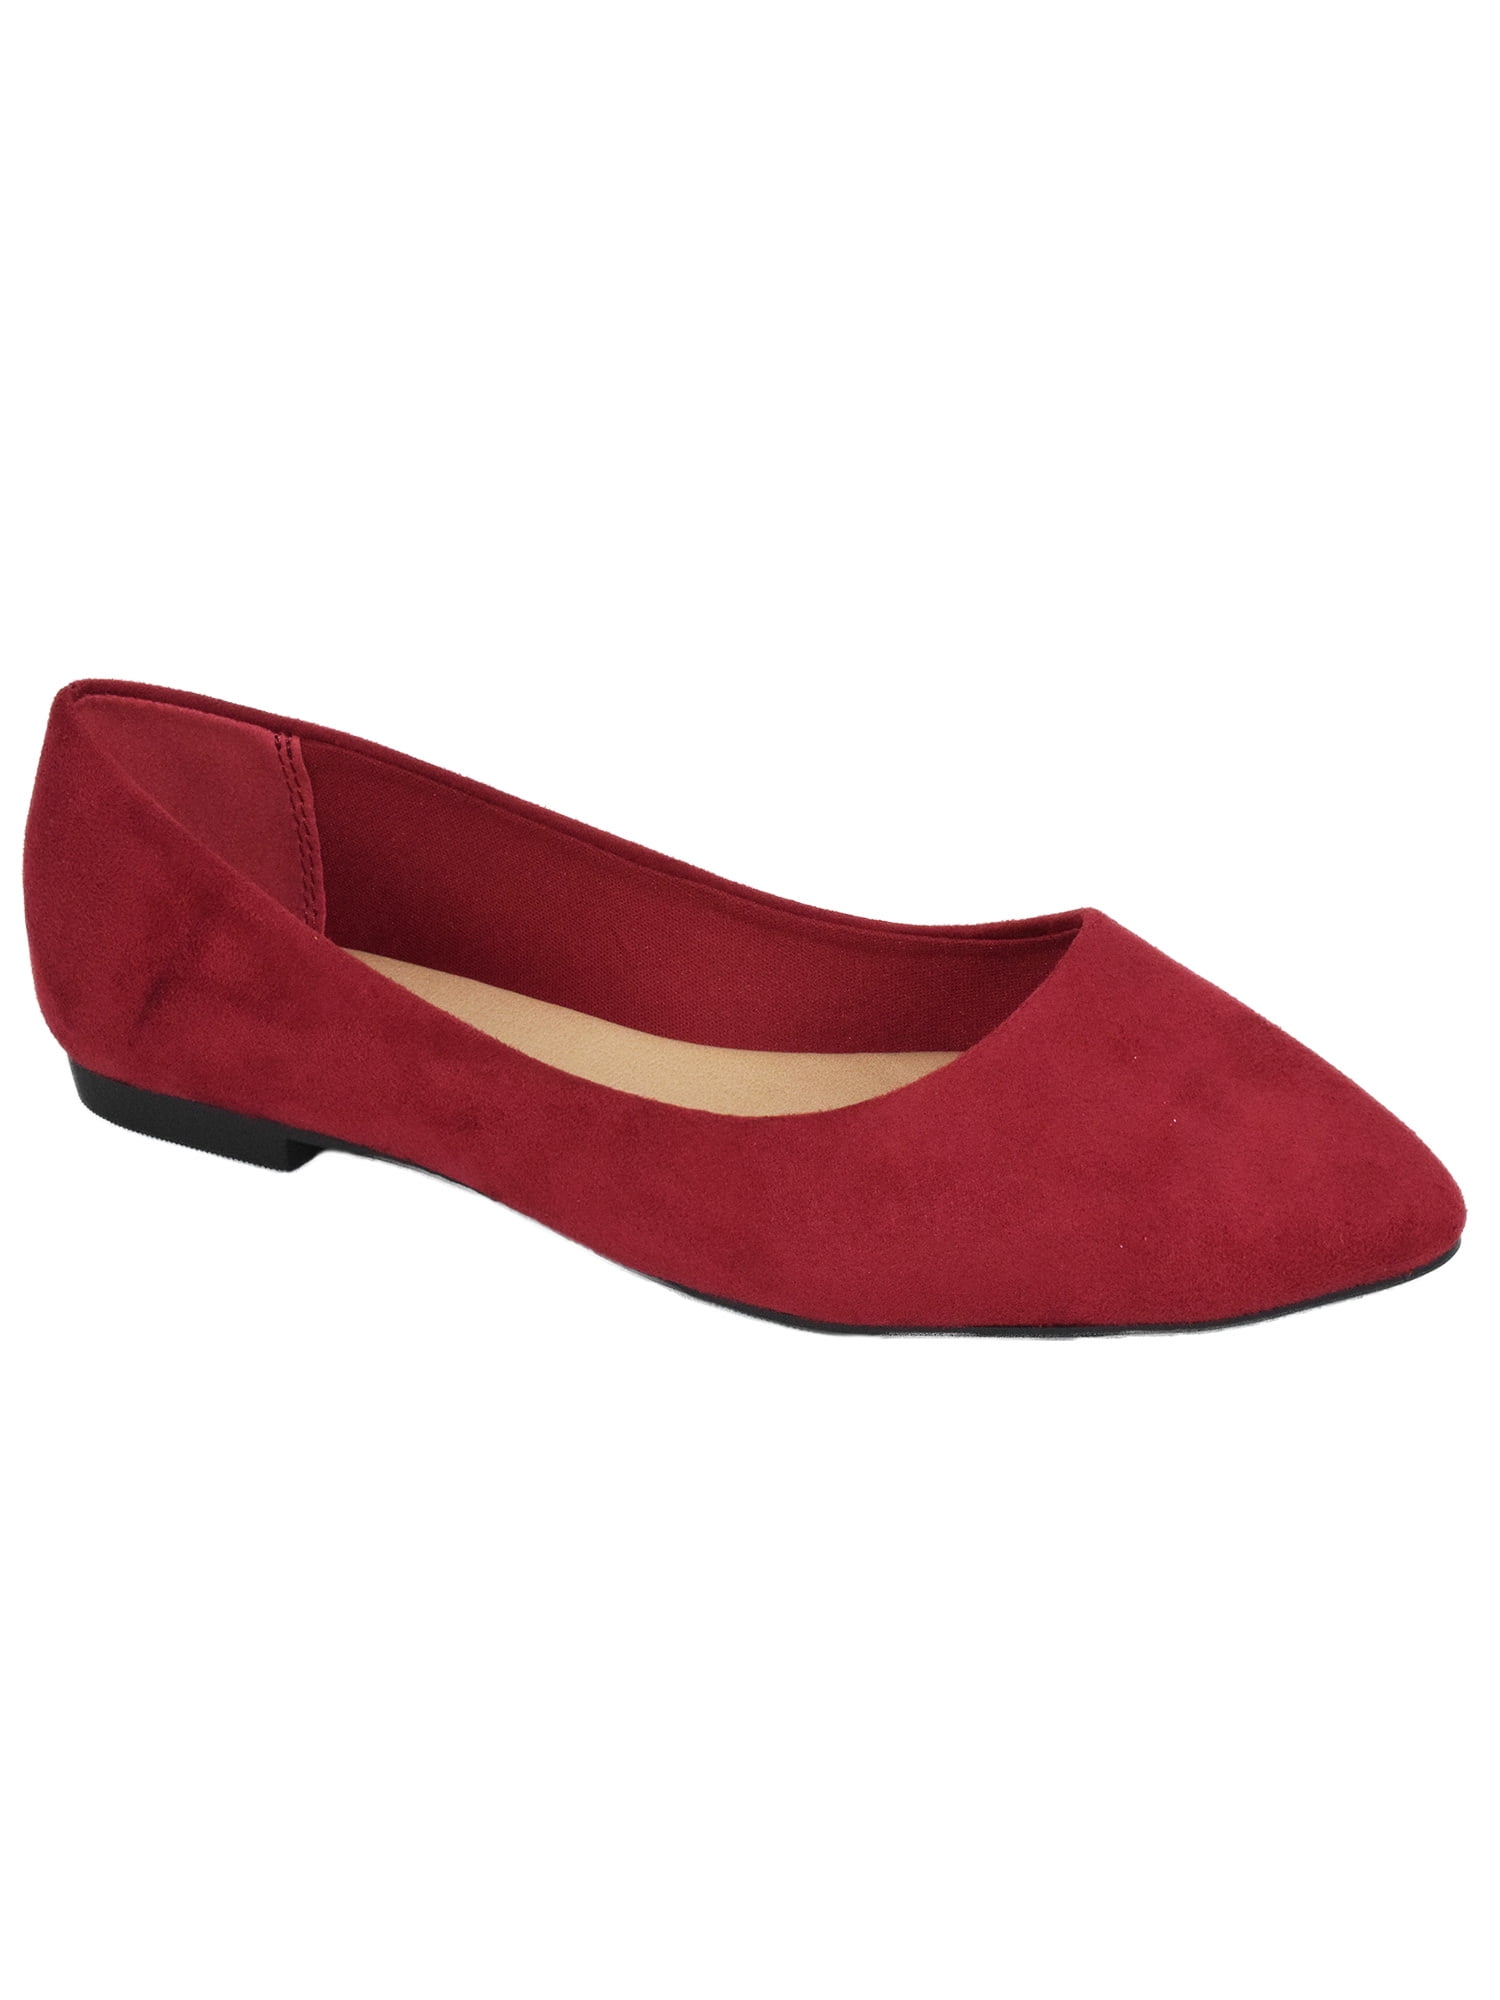 City Classified Women Casual Flat Shoes Wide Width Fit Pointy Toe Red Suede HOLD 